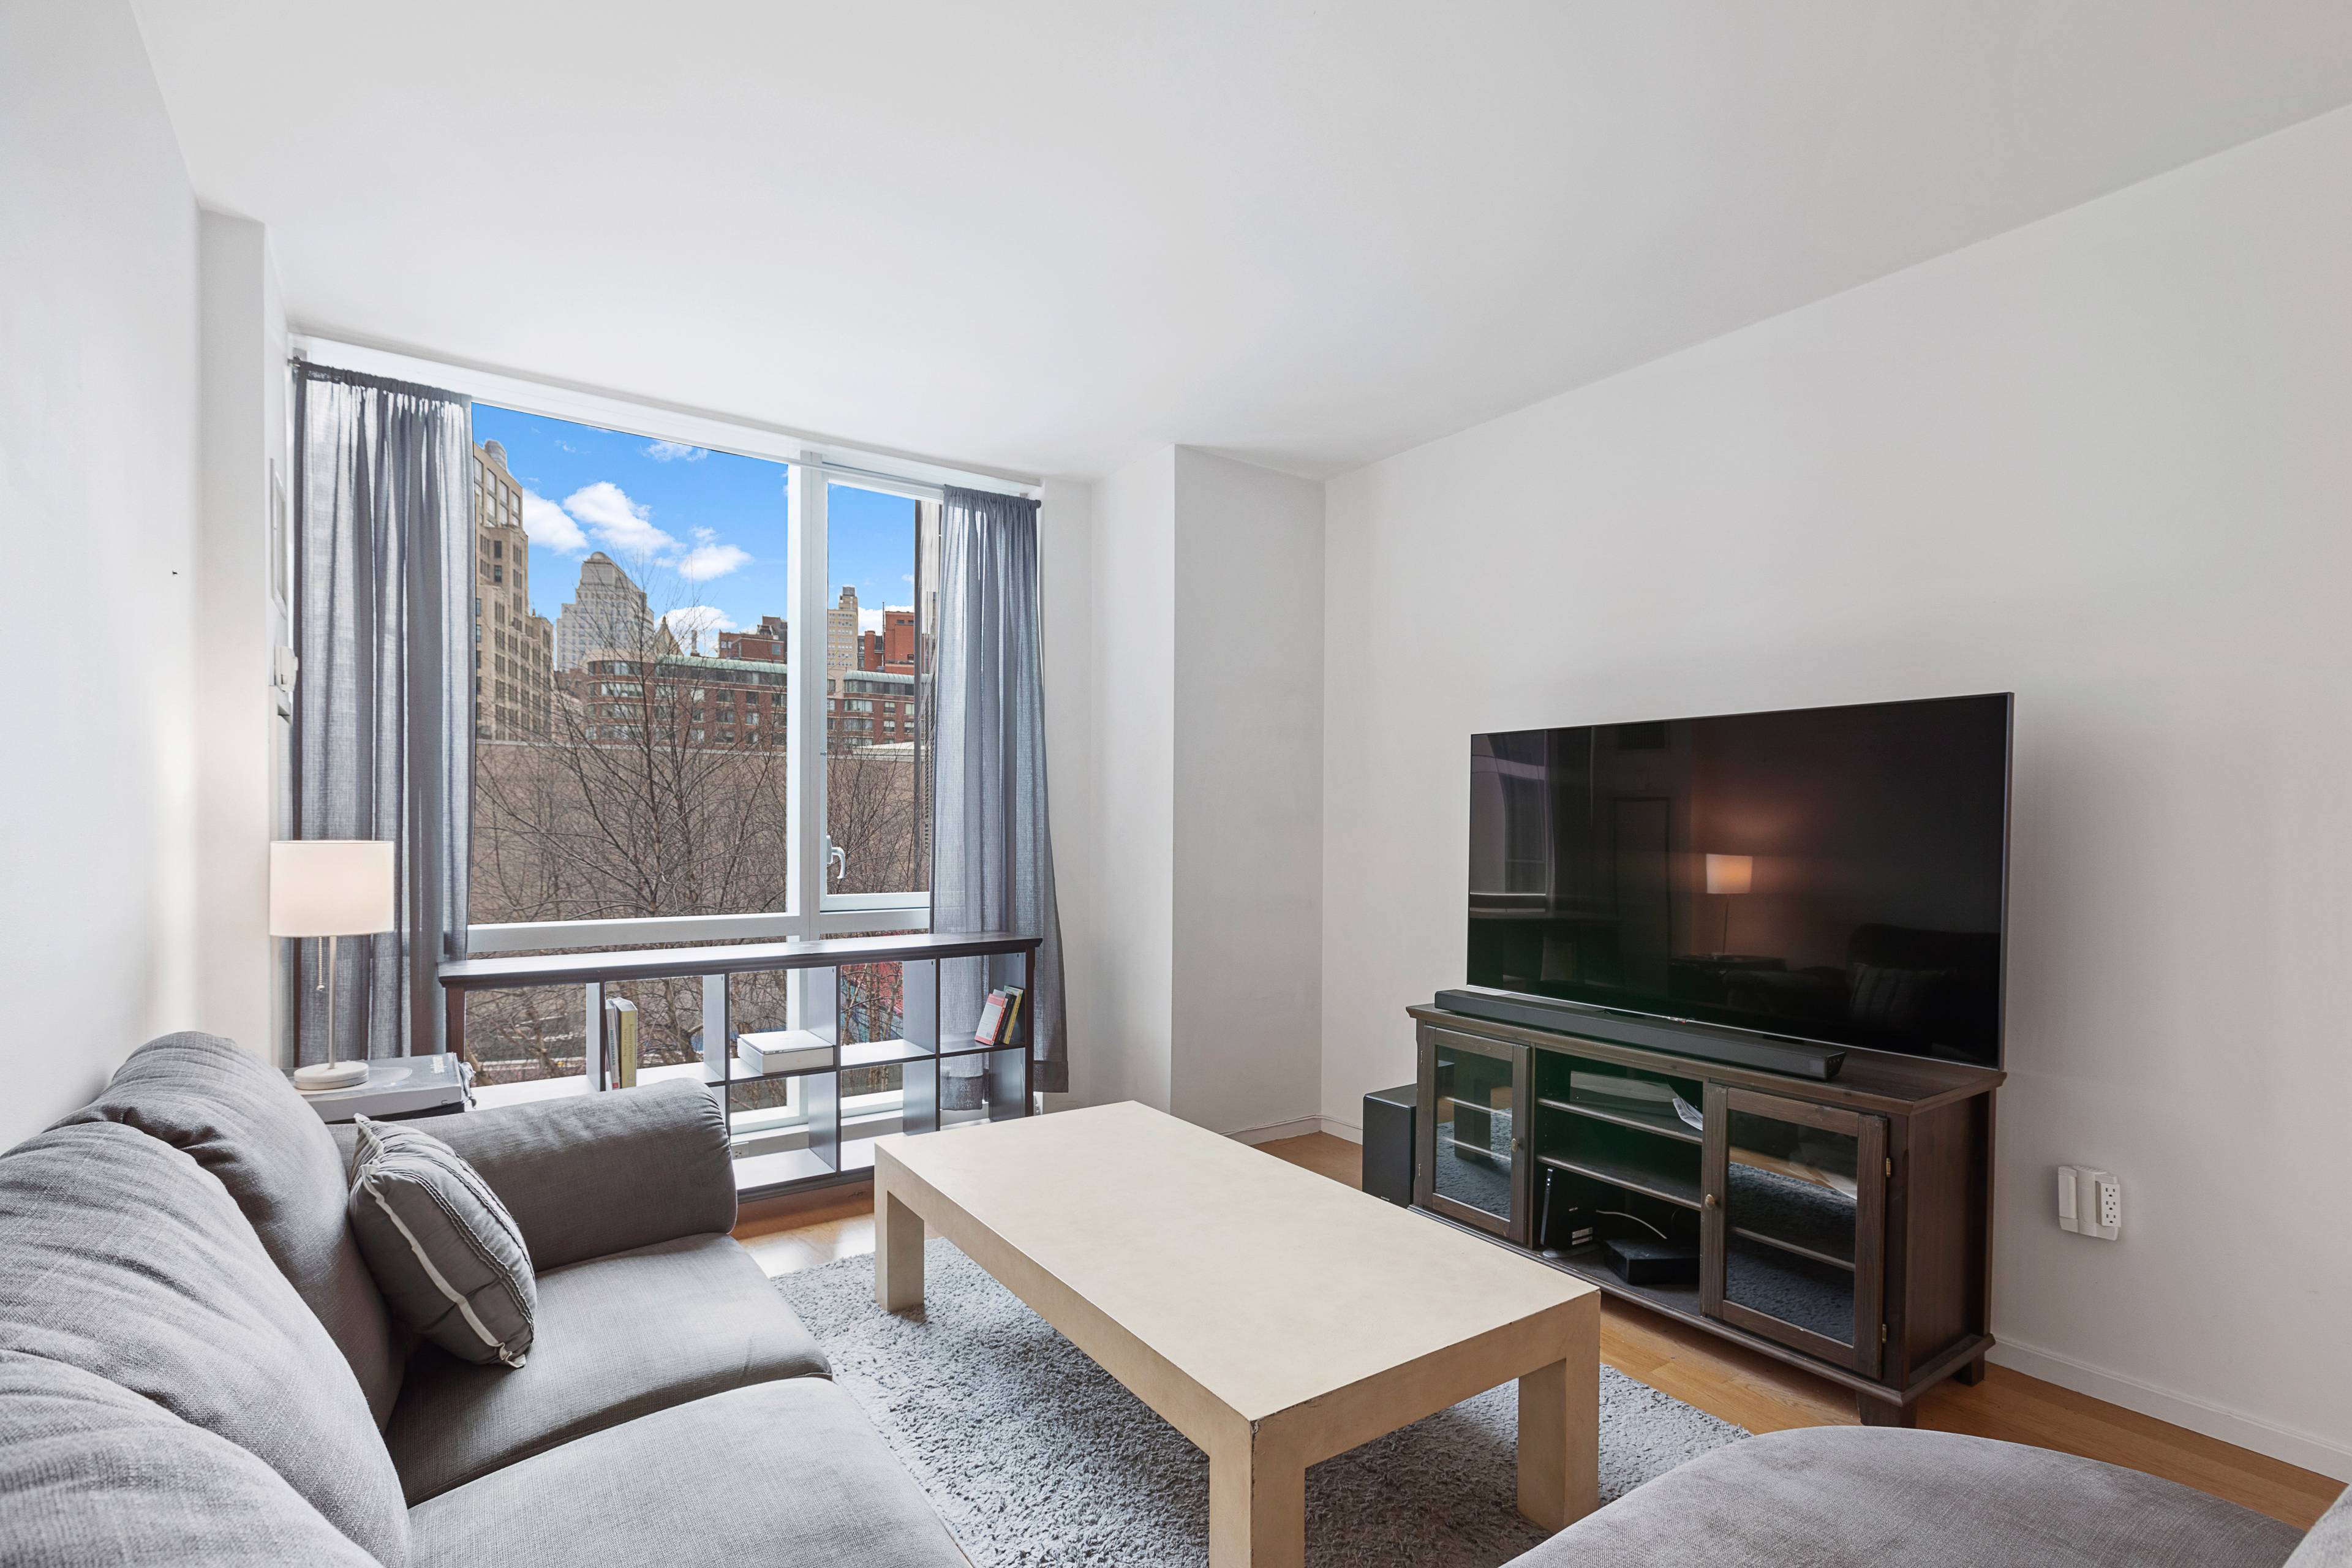 JUST LISTED! SPACIOUS 1 BEDROOM IN THE HEART OF TRIBECA FOR SALE